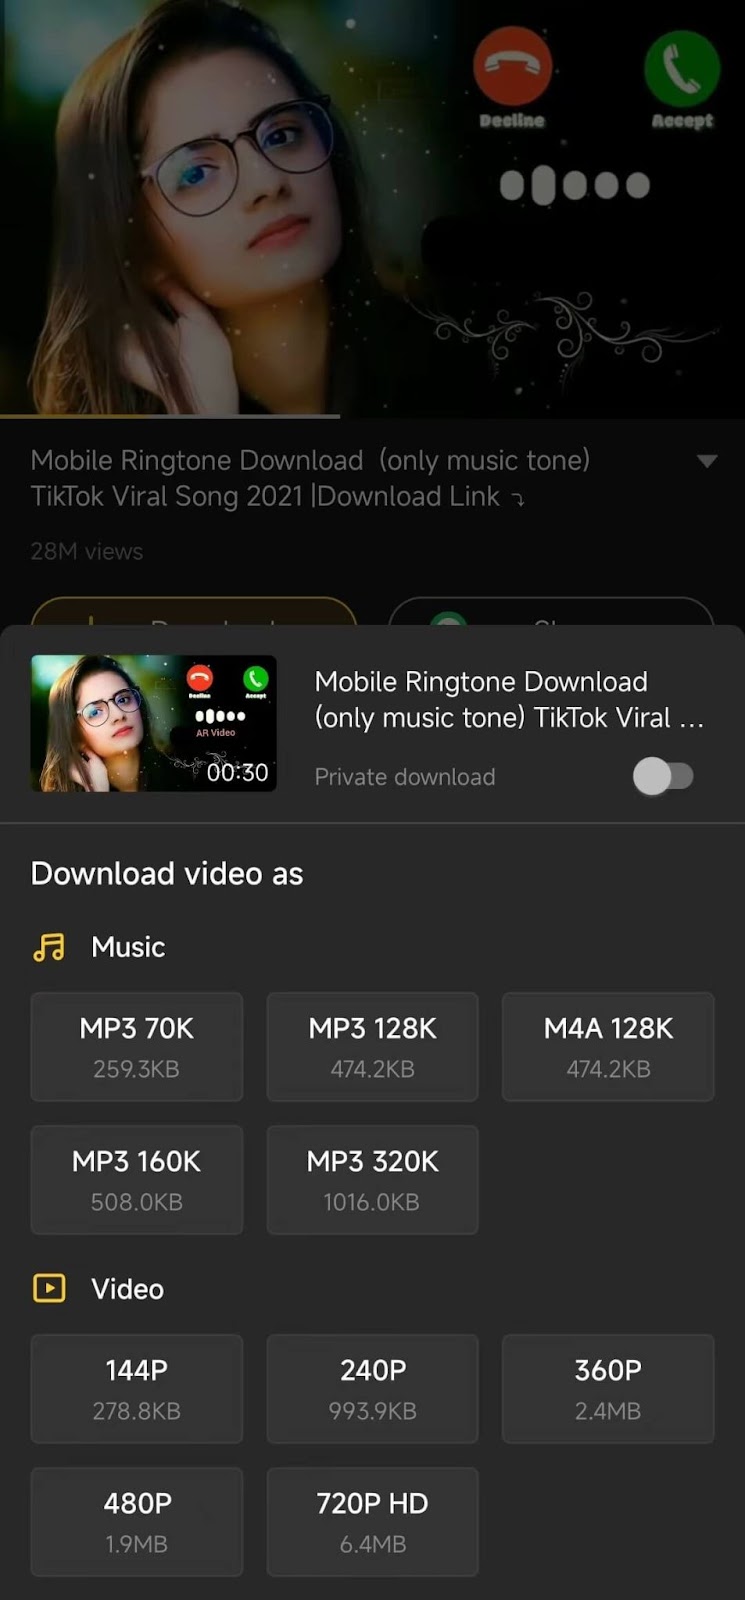 choose a resolution and download the ringtone